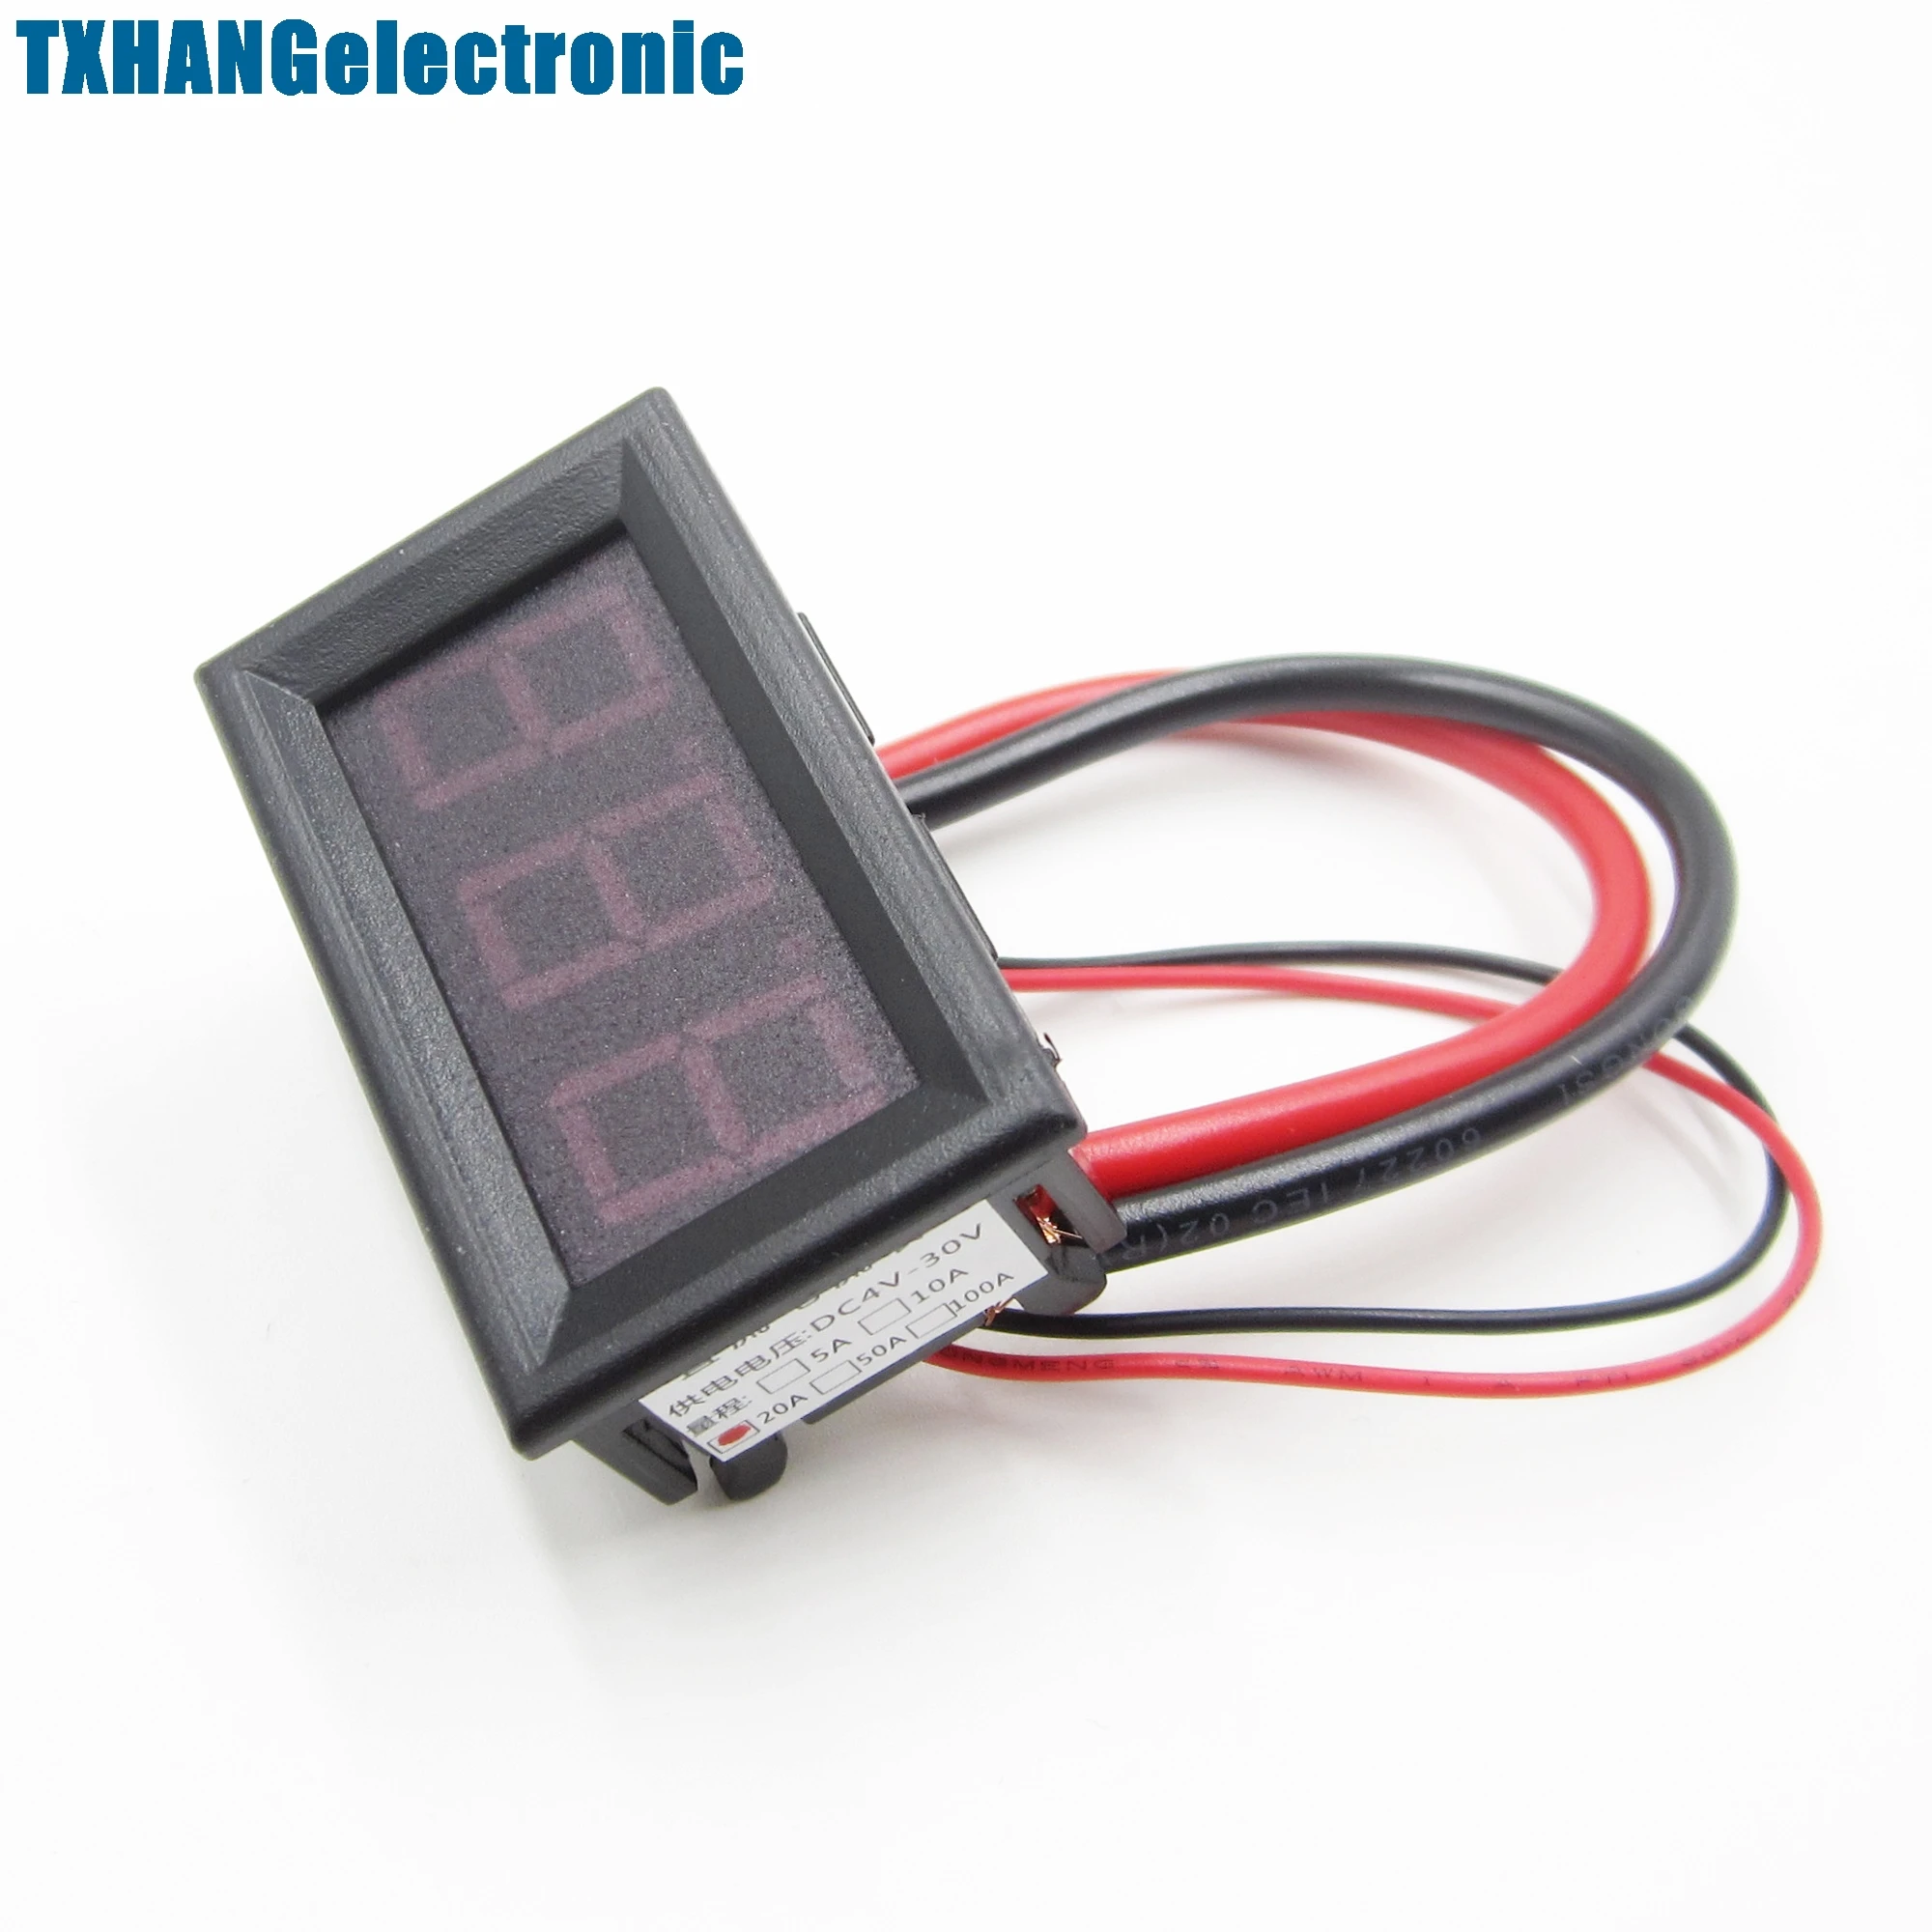 NEW DC 0 To 20A Mini Red LED Panel Meter Digital Ammeter 